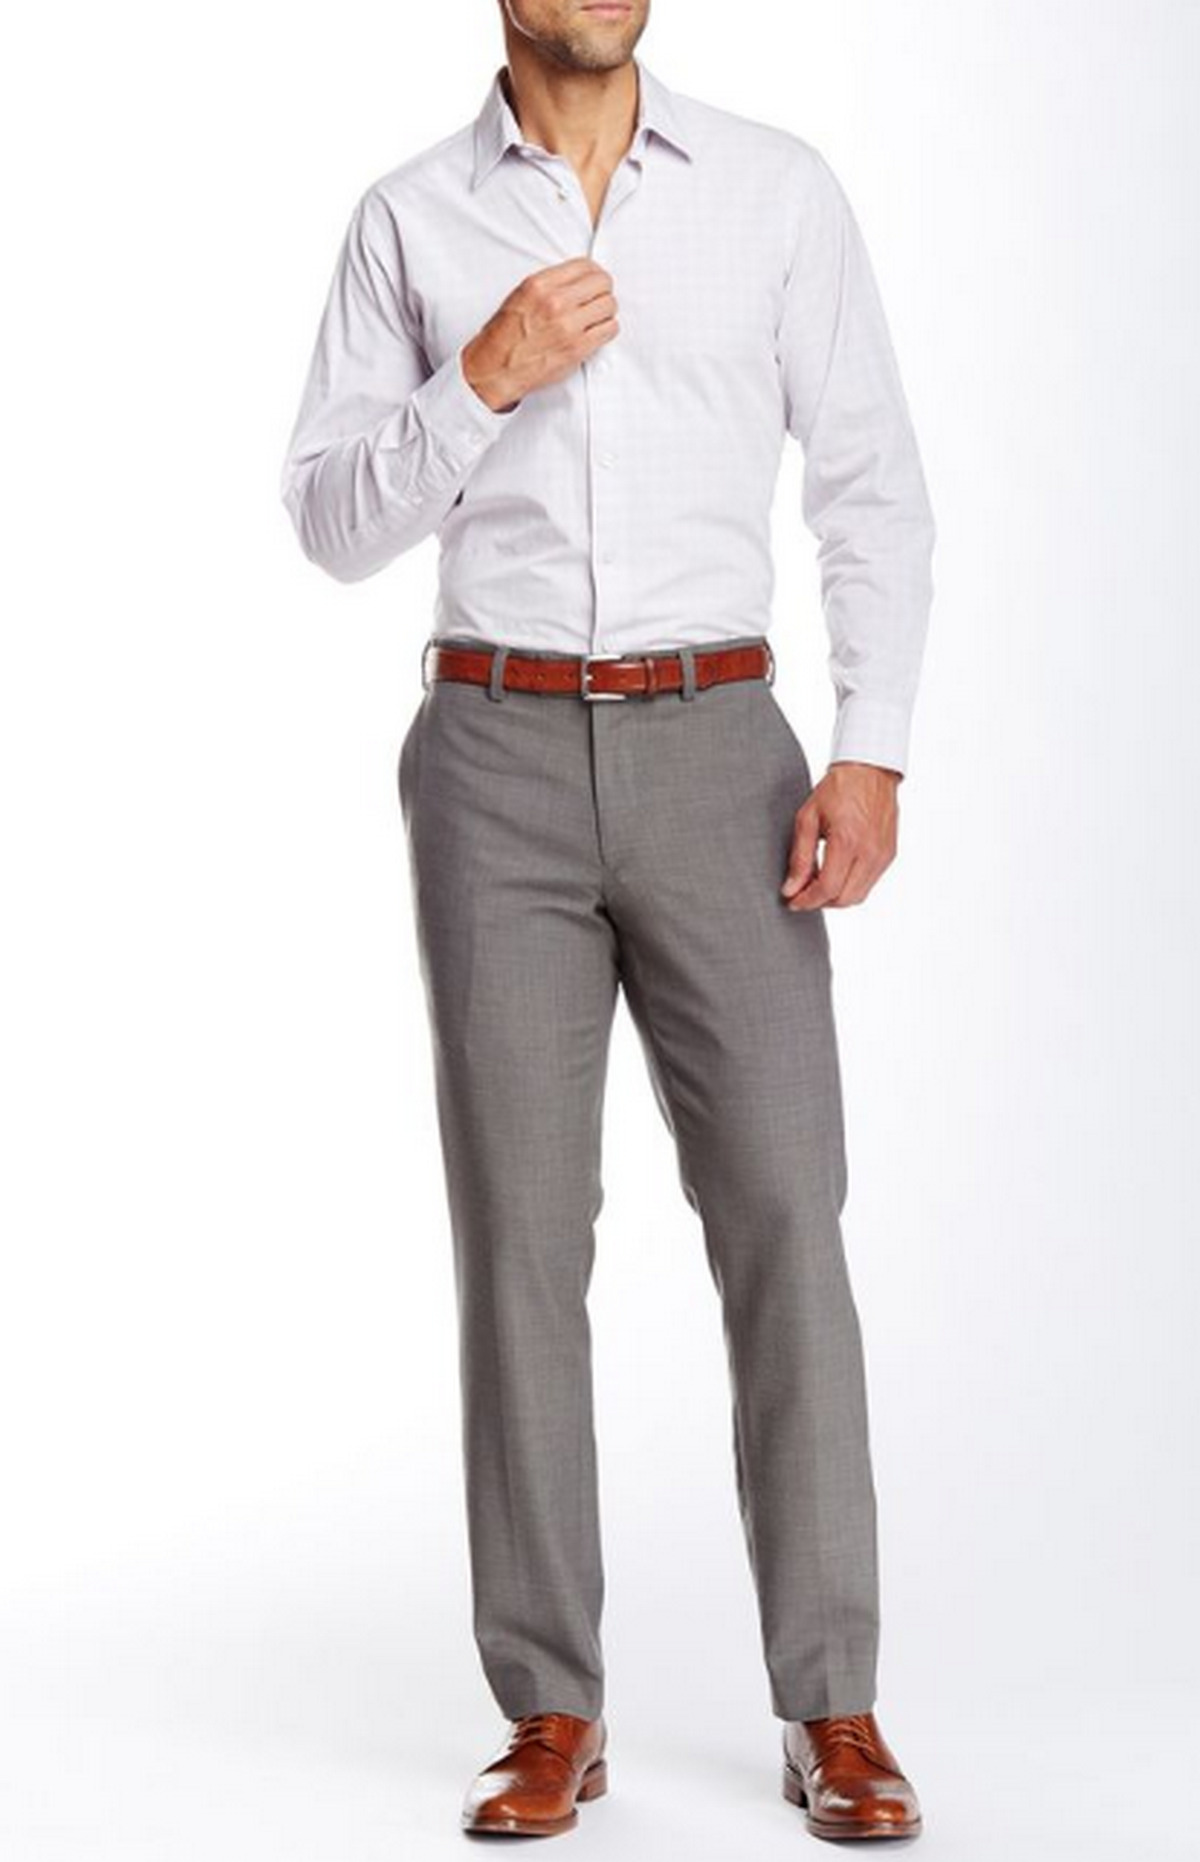 Outfit Ideas For Men What To Wear With Grey Pants  Blue shirt outfits  Light blue shirts Grey pants outfit